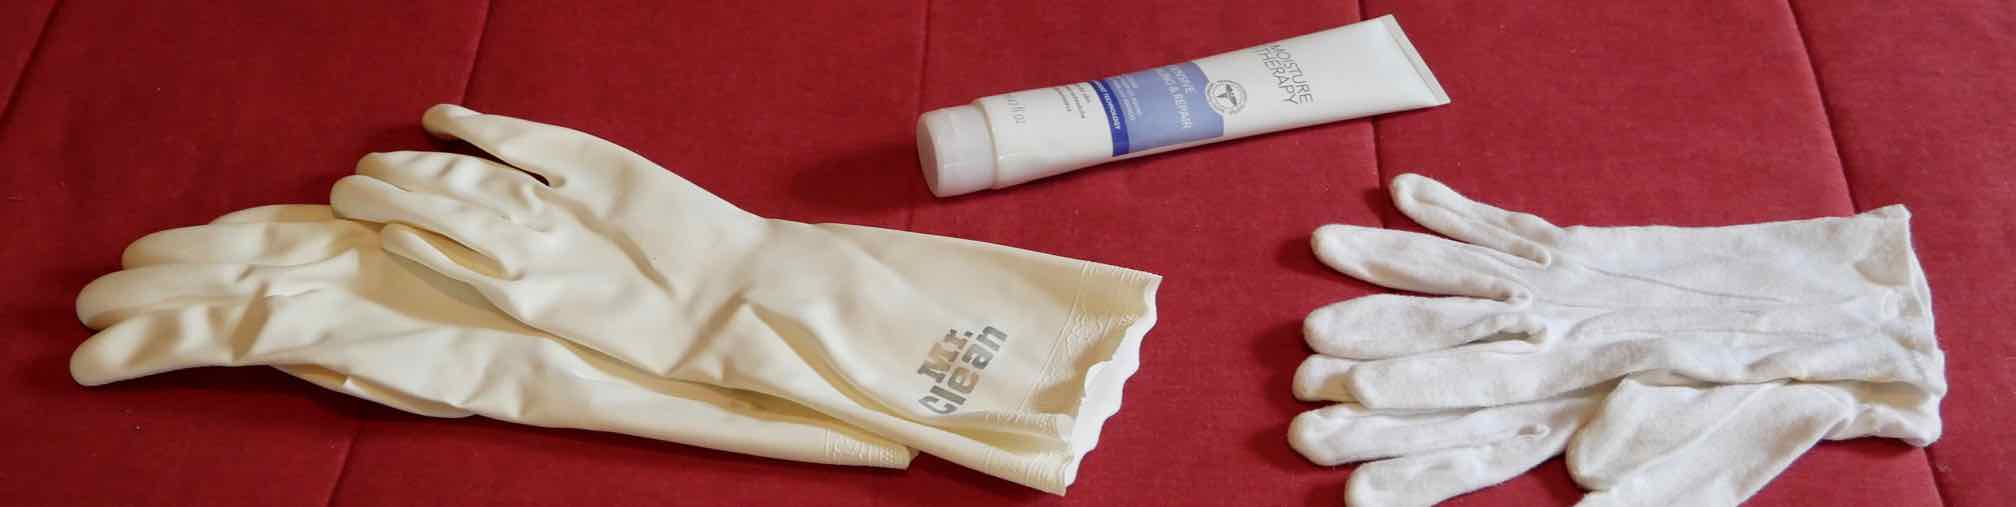  protective latex gloves, tube of hand cream, and white cotton gloves